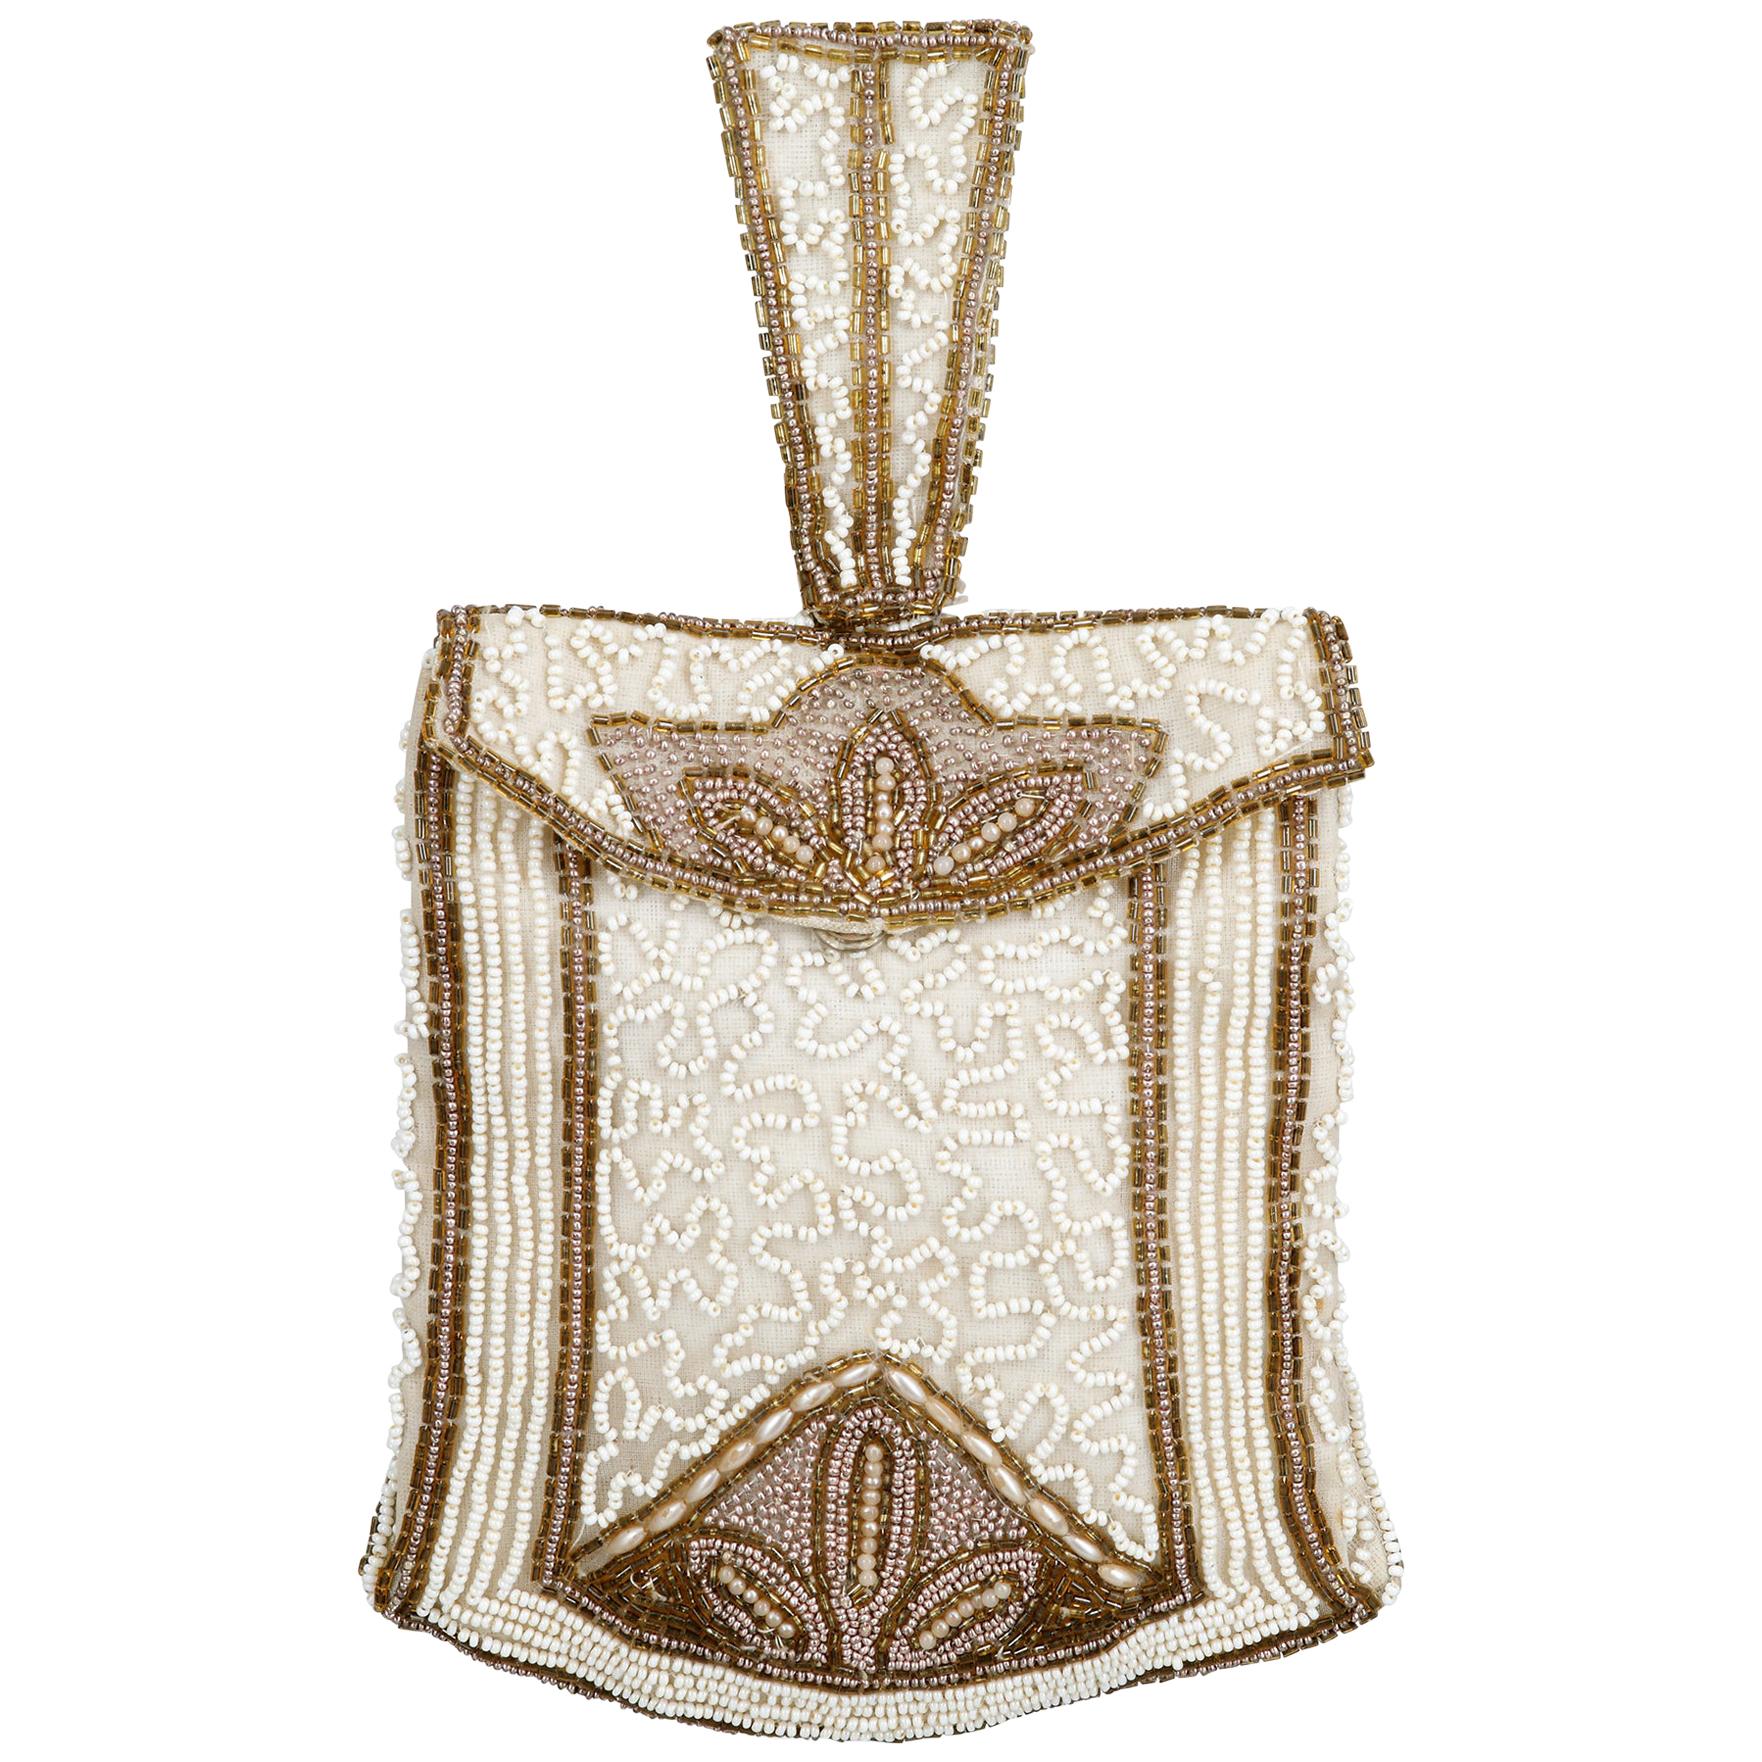 Late 1920s or Early 1930s Art Deco Cream and Gold Beaded Bag